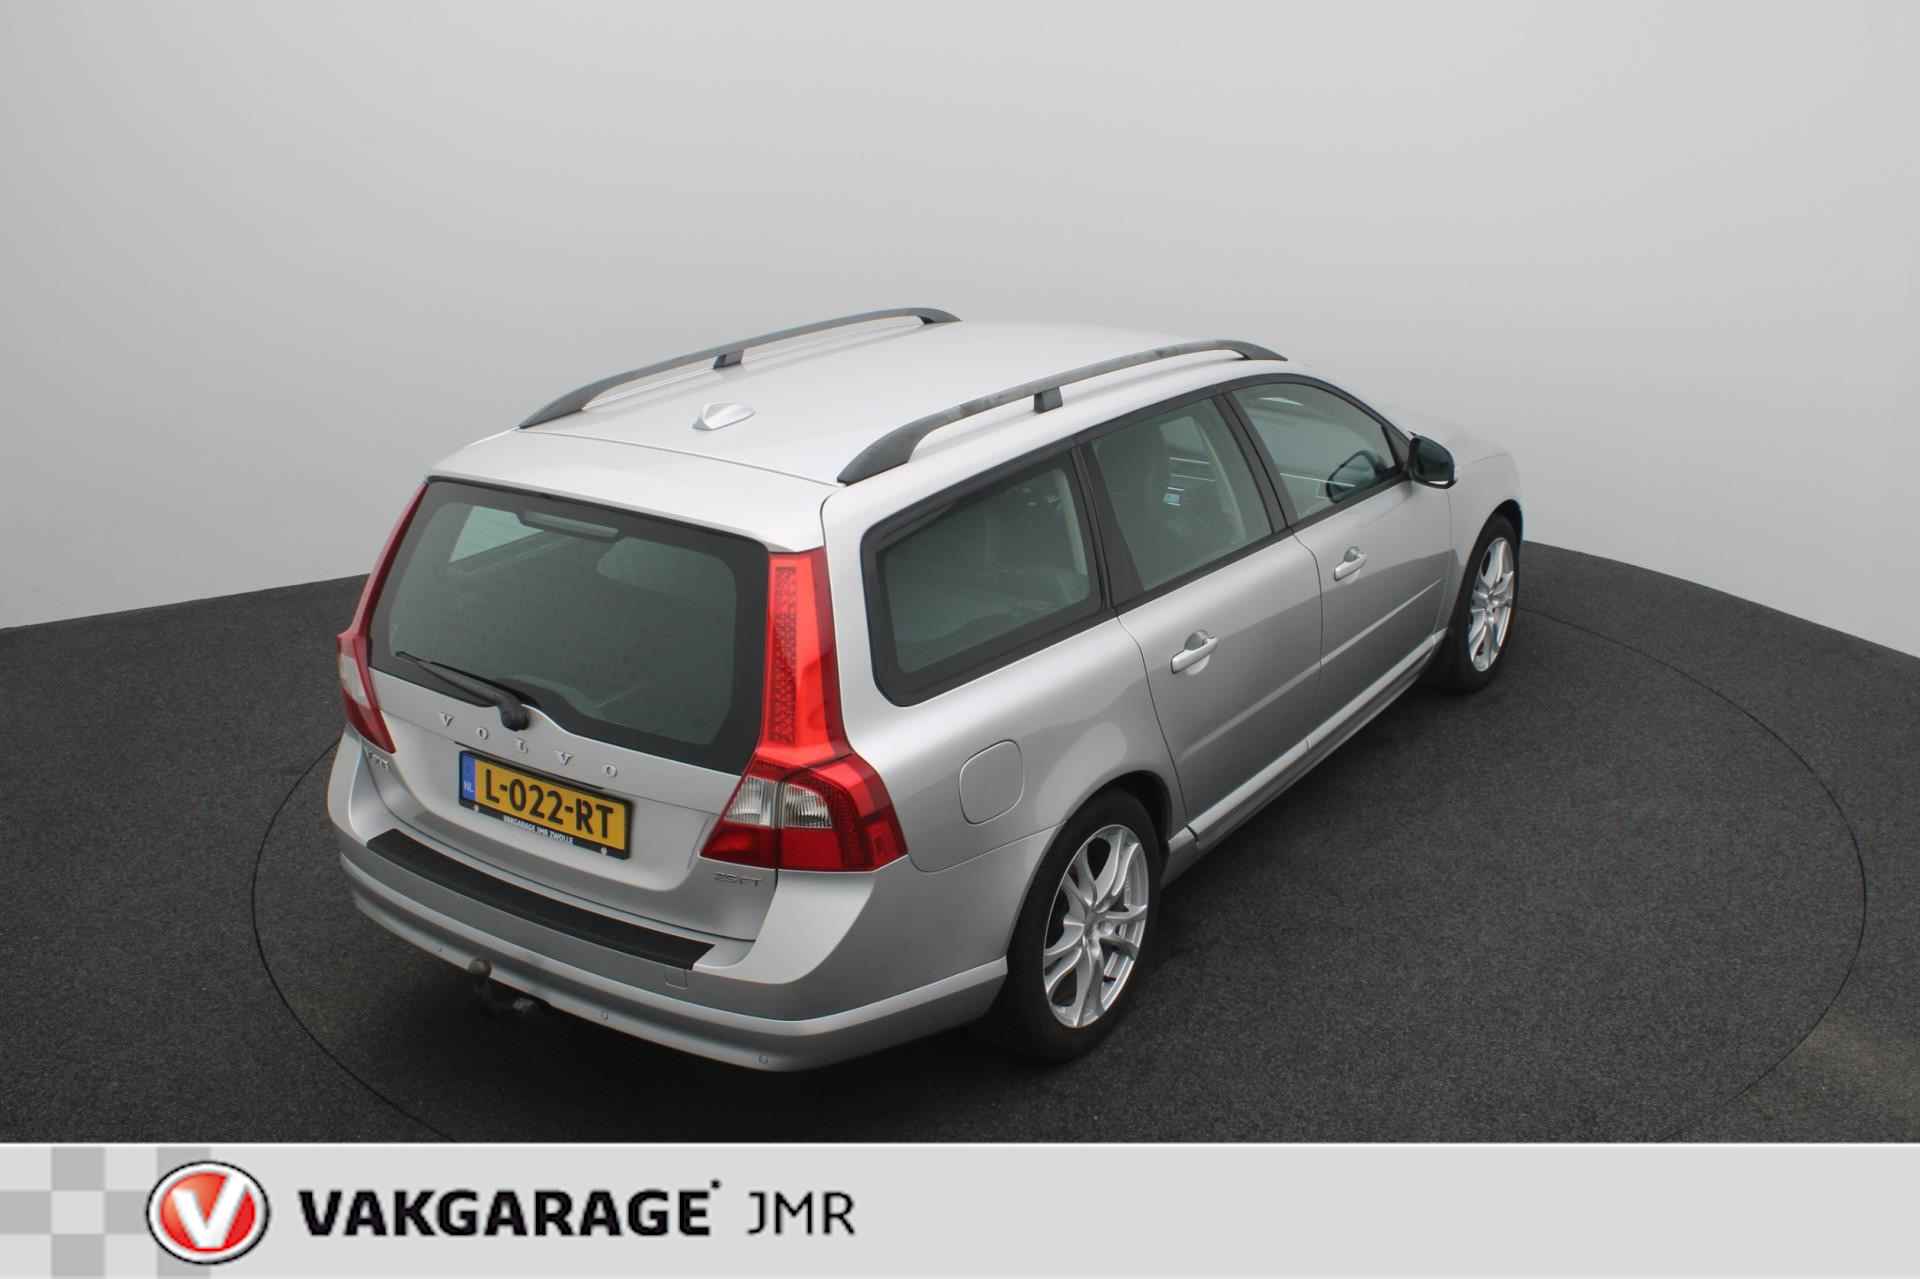 Volvo V70 2.5FT Momentum Youngtimer Trekhaak - PDC Achter - Stoel + Achterbank verwarming - Bluetooth - Climate en Cruise Control - 6/39